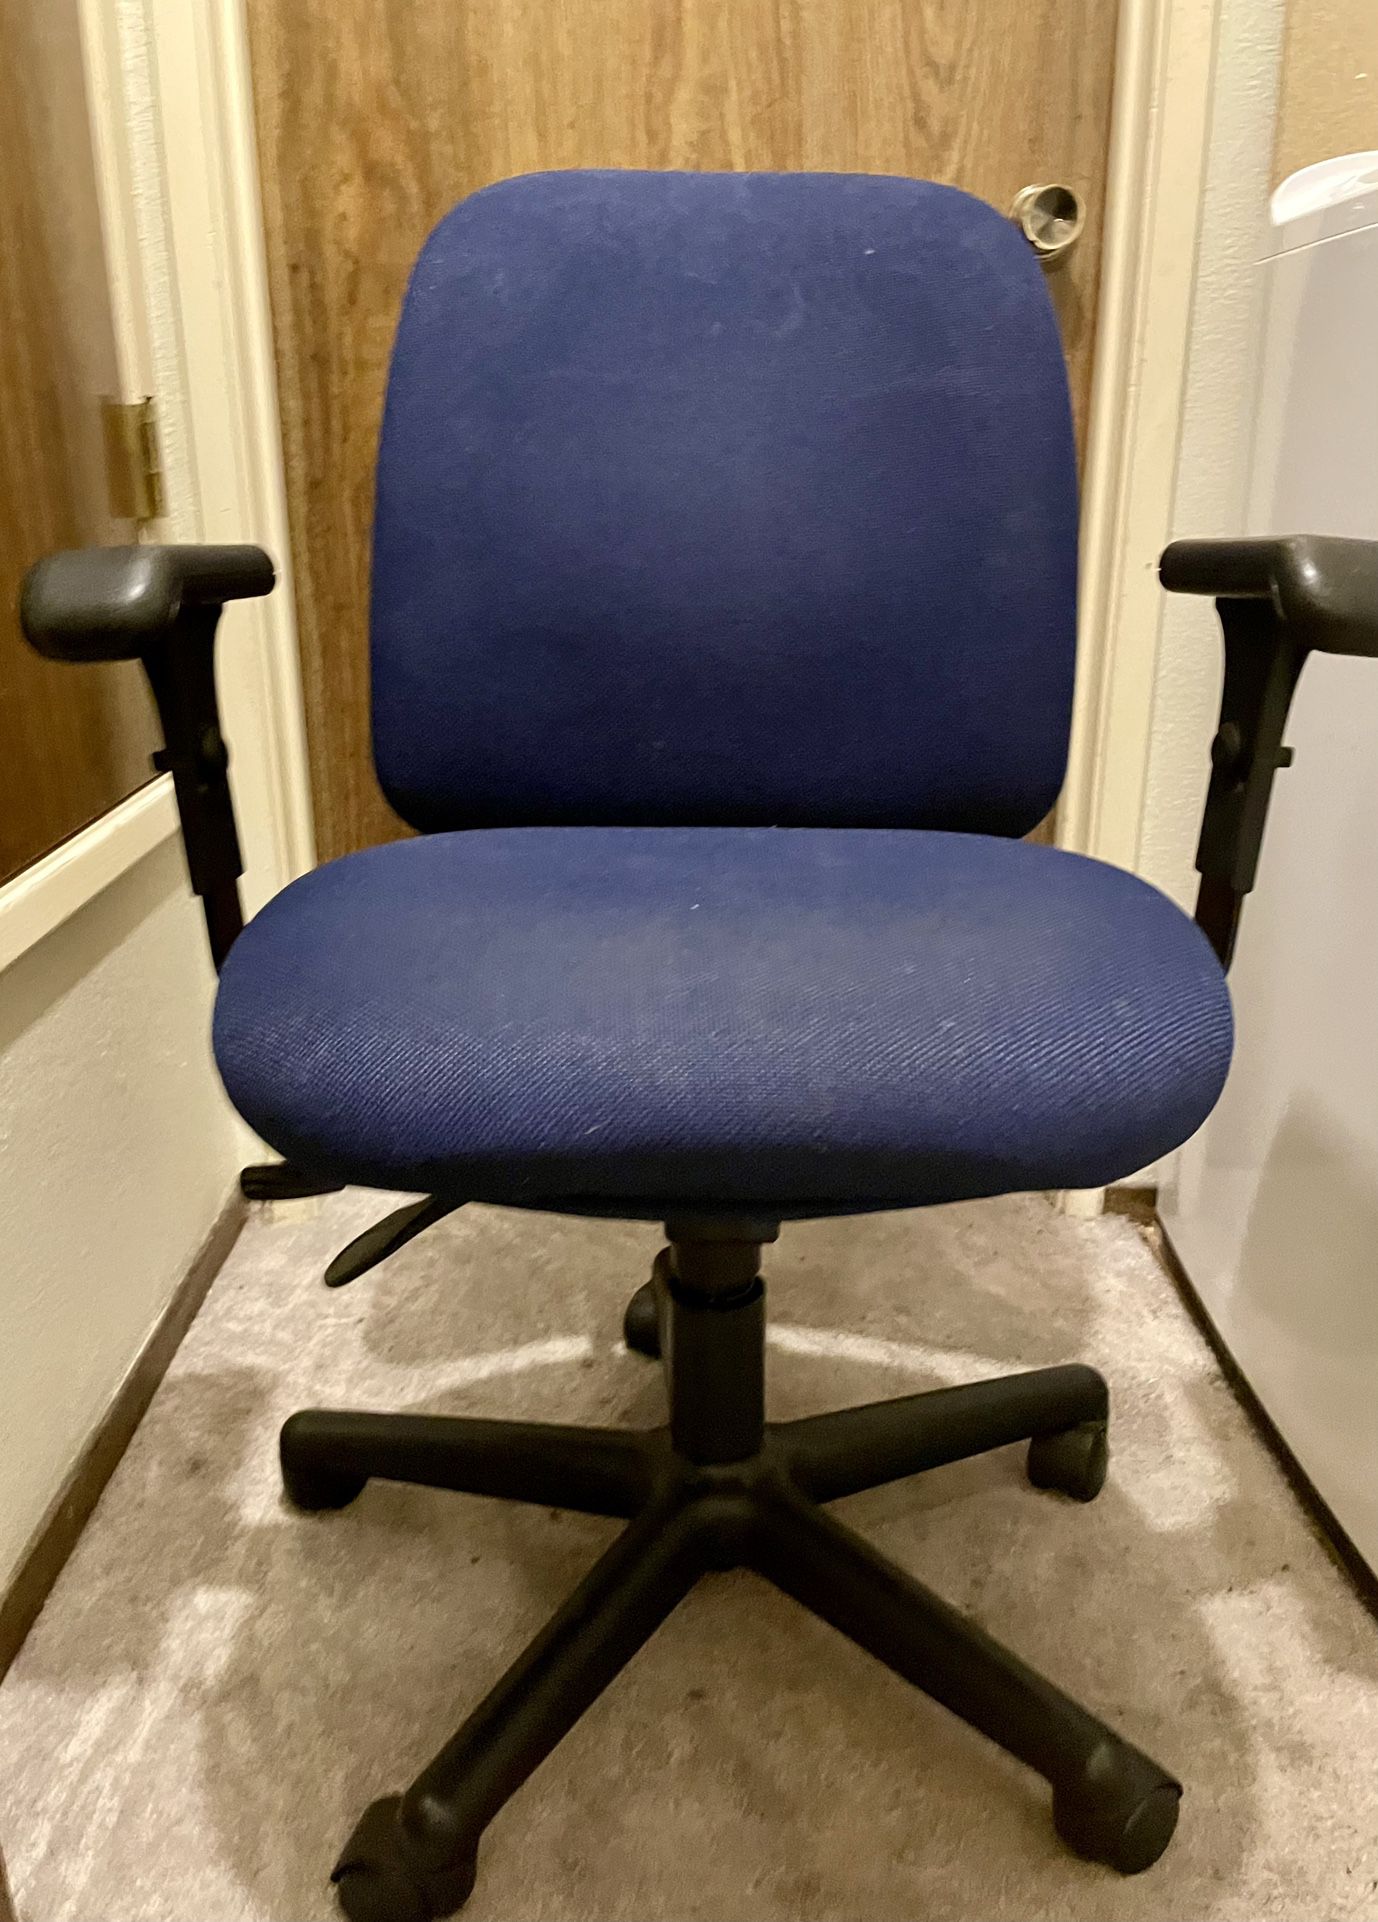 Sherman 24/7 Task Chair w/Arms. Color: Blue